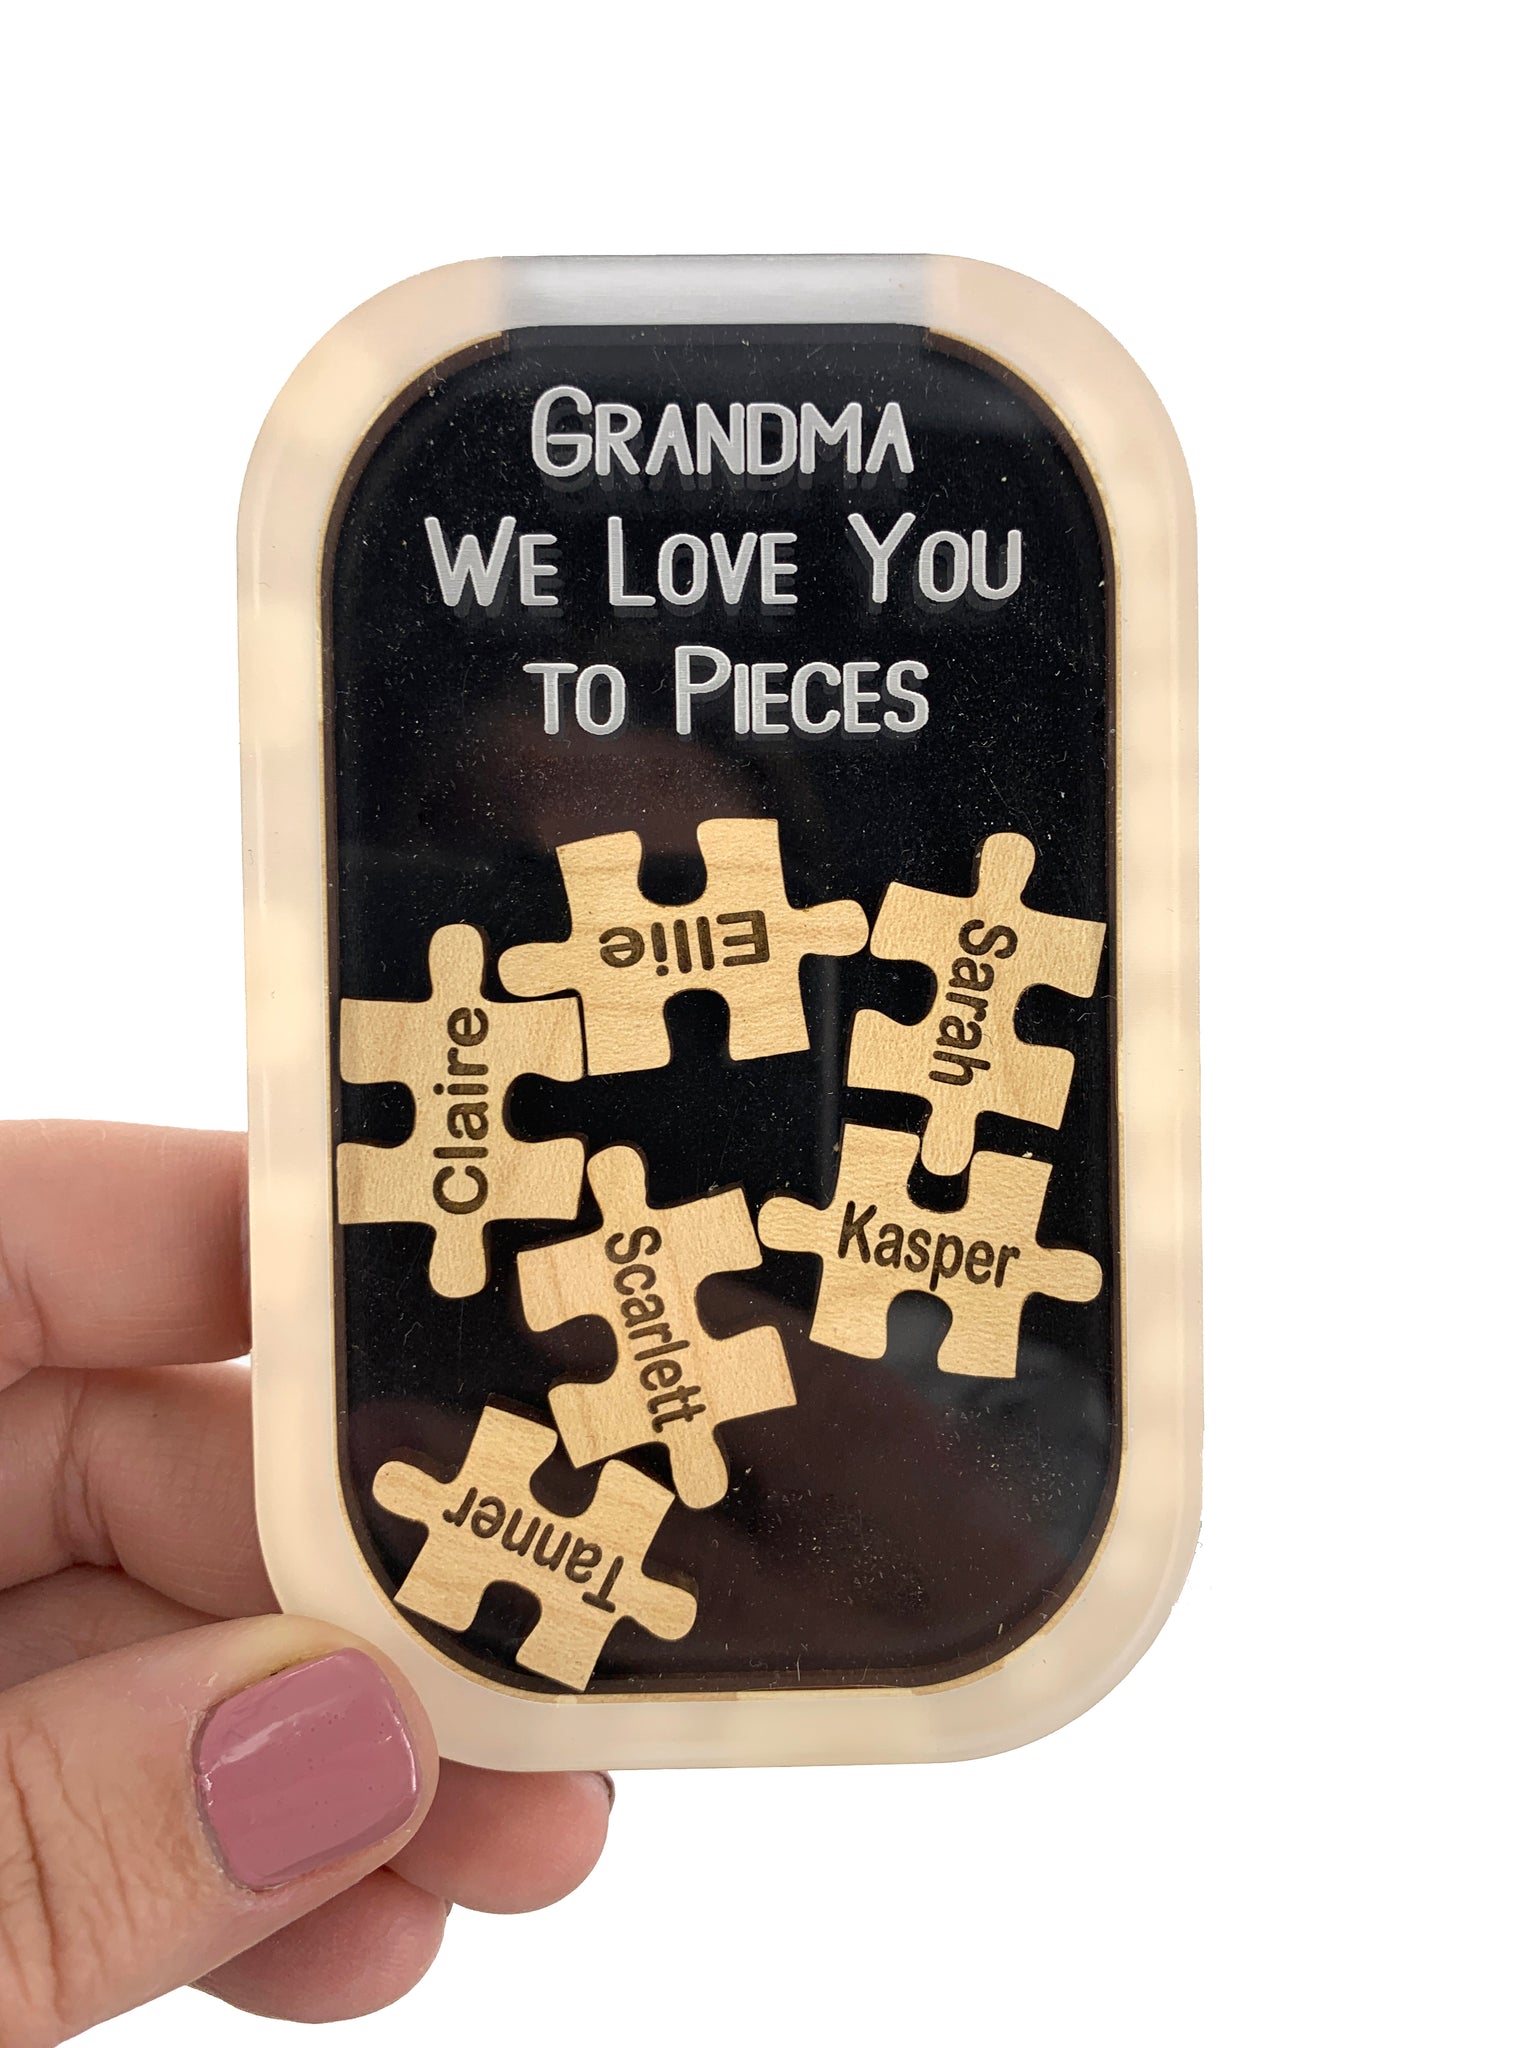 Cookie Jar Personalized Magnet or Stand Gift for Grandparents with Grand  Children Names Little Cookies Gifts – Weathered Raindrop